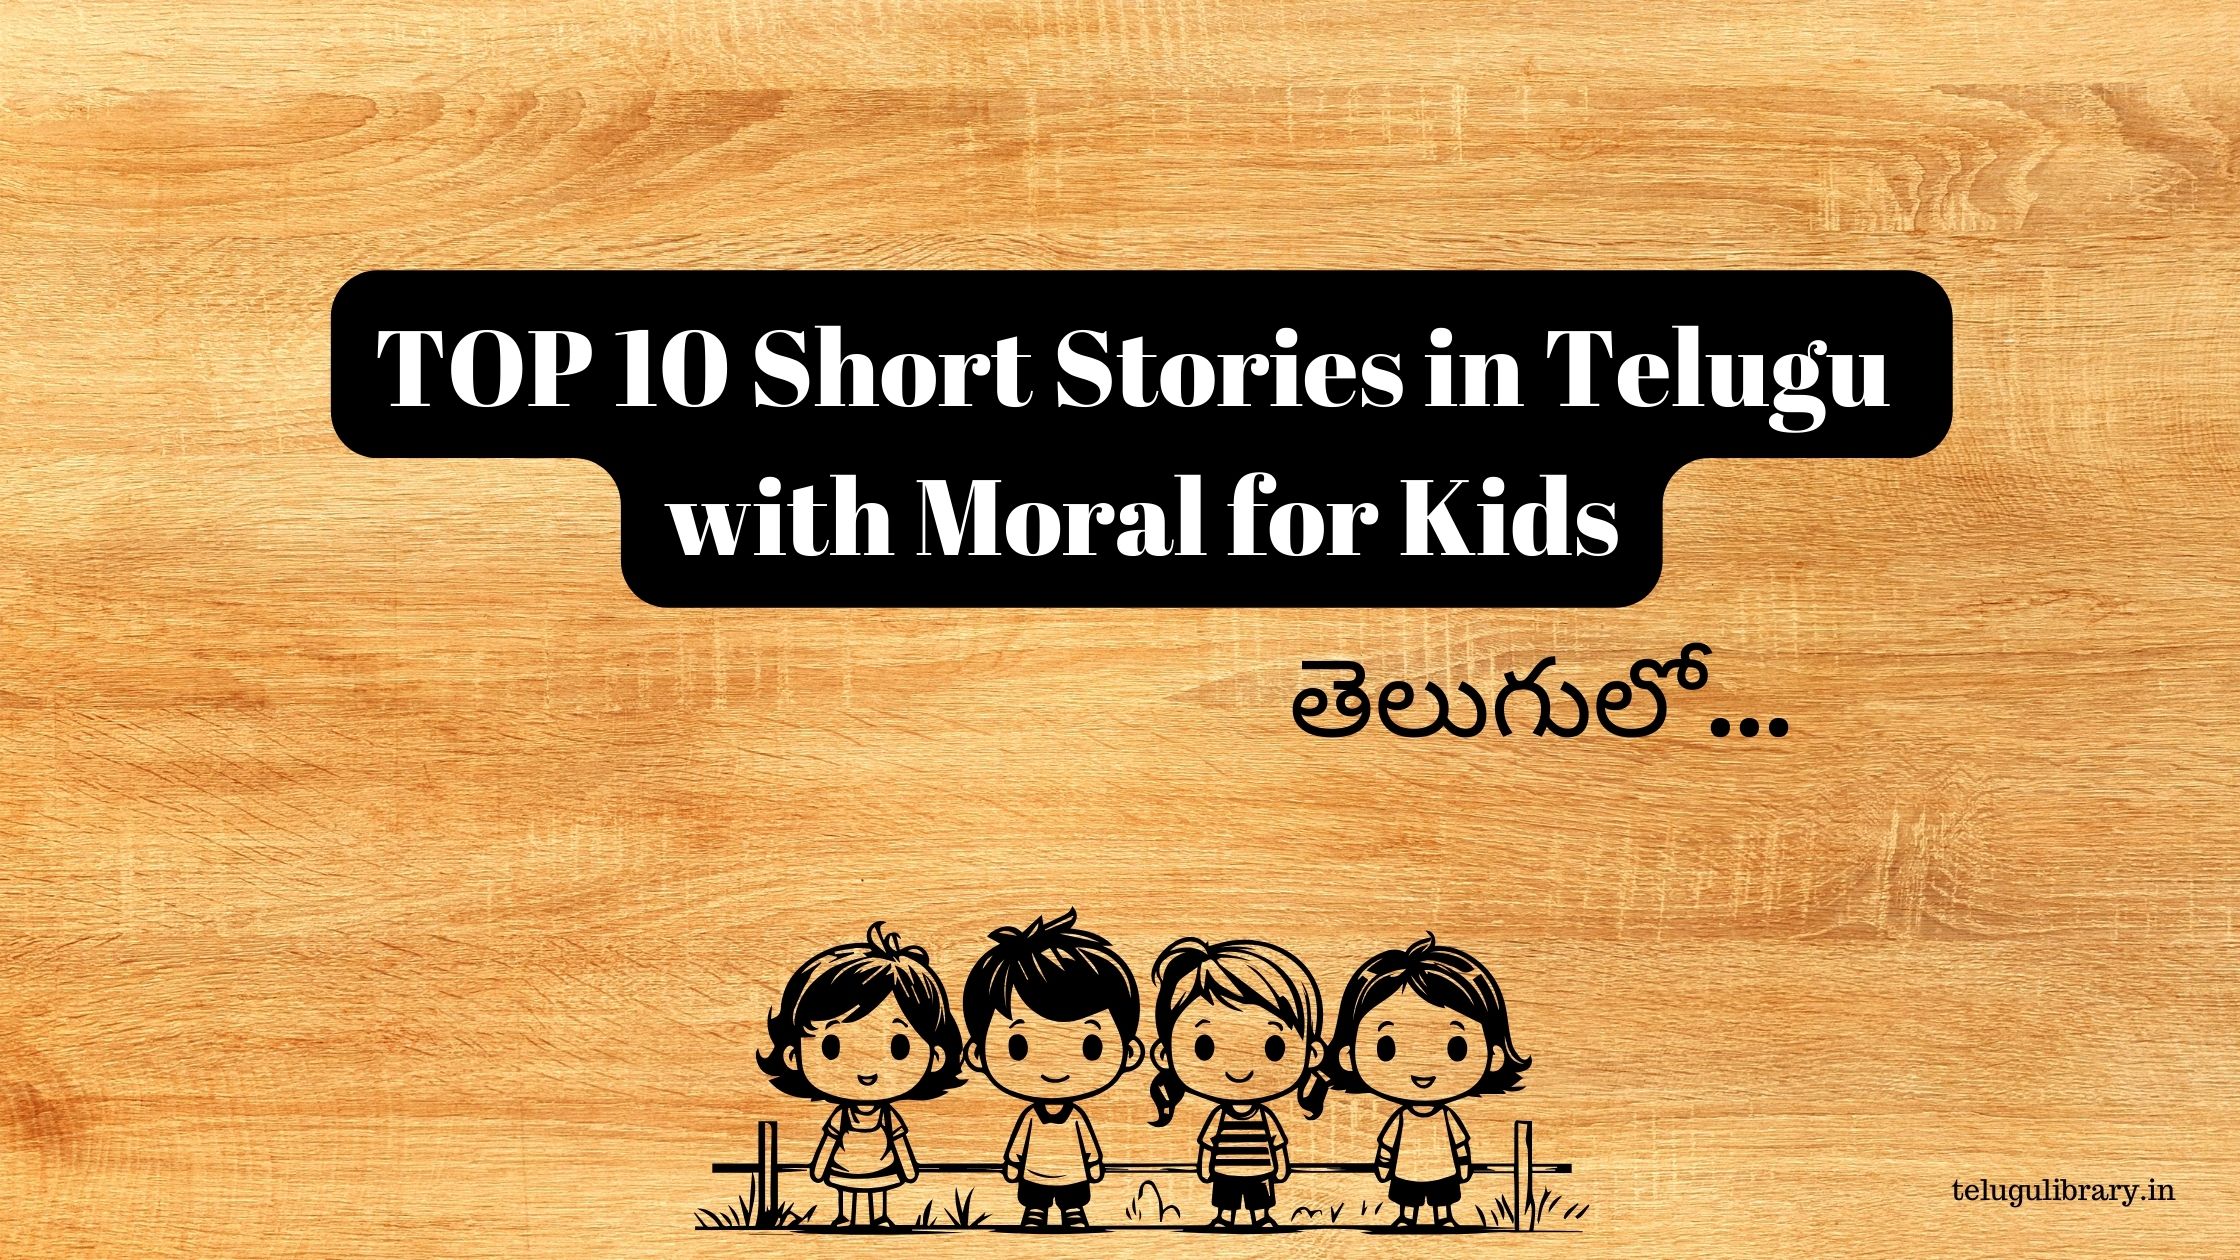 TOP 10 Short Stories in Telugu with Moral for Kids